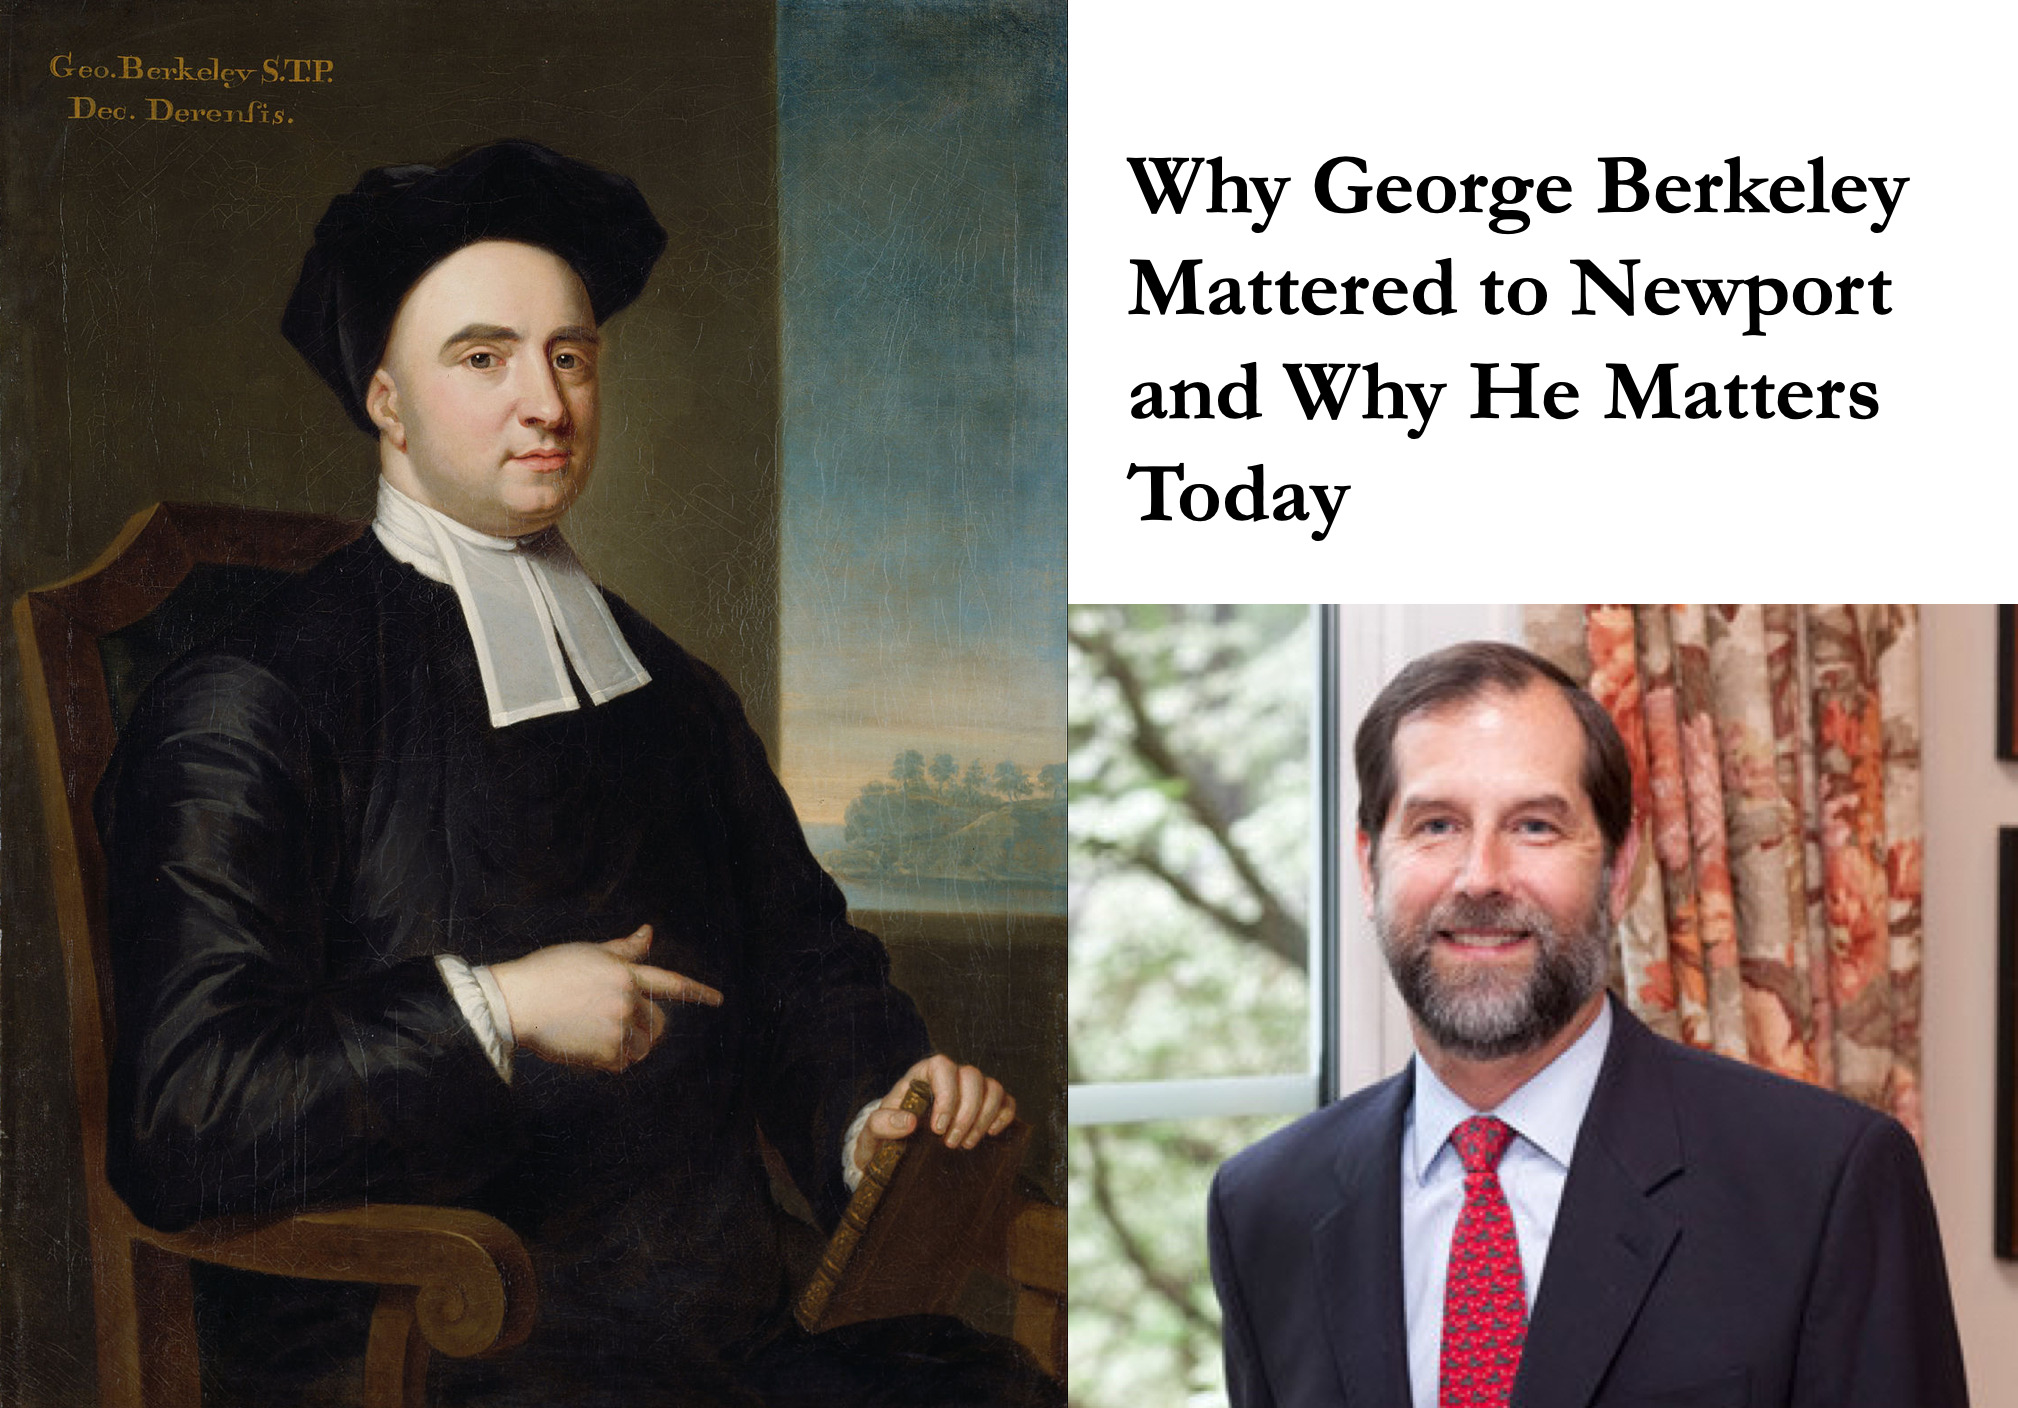 George Berkeley: Why He Mattered to Newport and Why He Matters Today